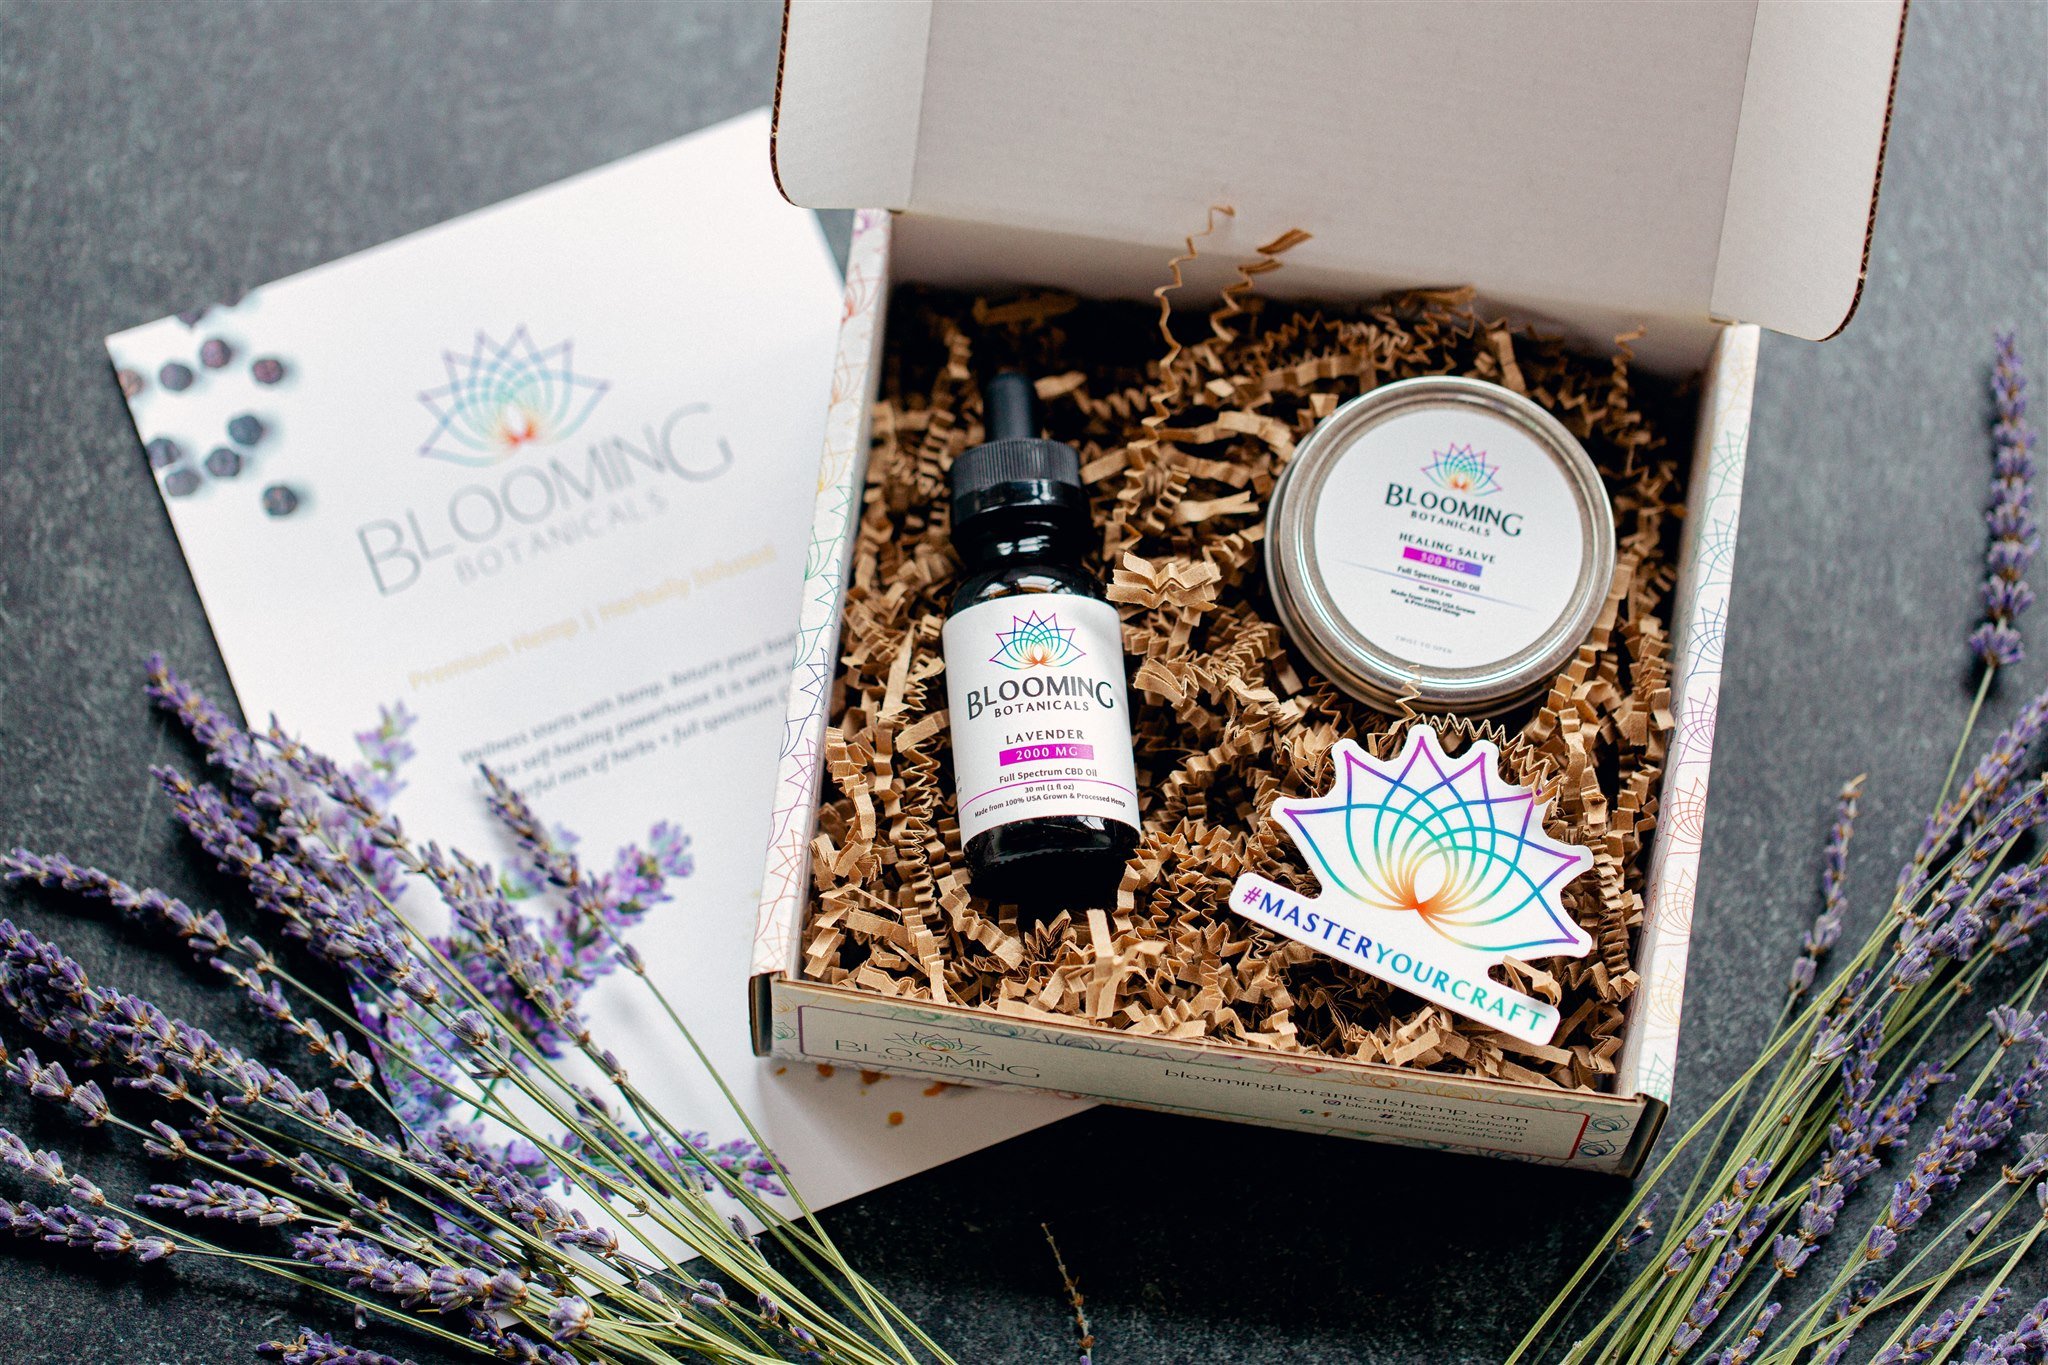 Blooming Botanicals Lavender CBD Tincture, 500mg CBD Healing Salve and master your craft sticker in rainbow packaging